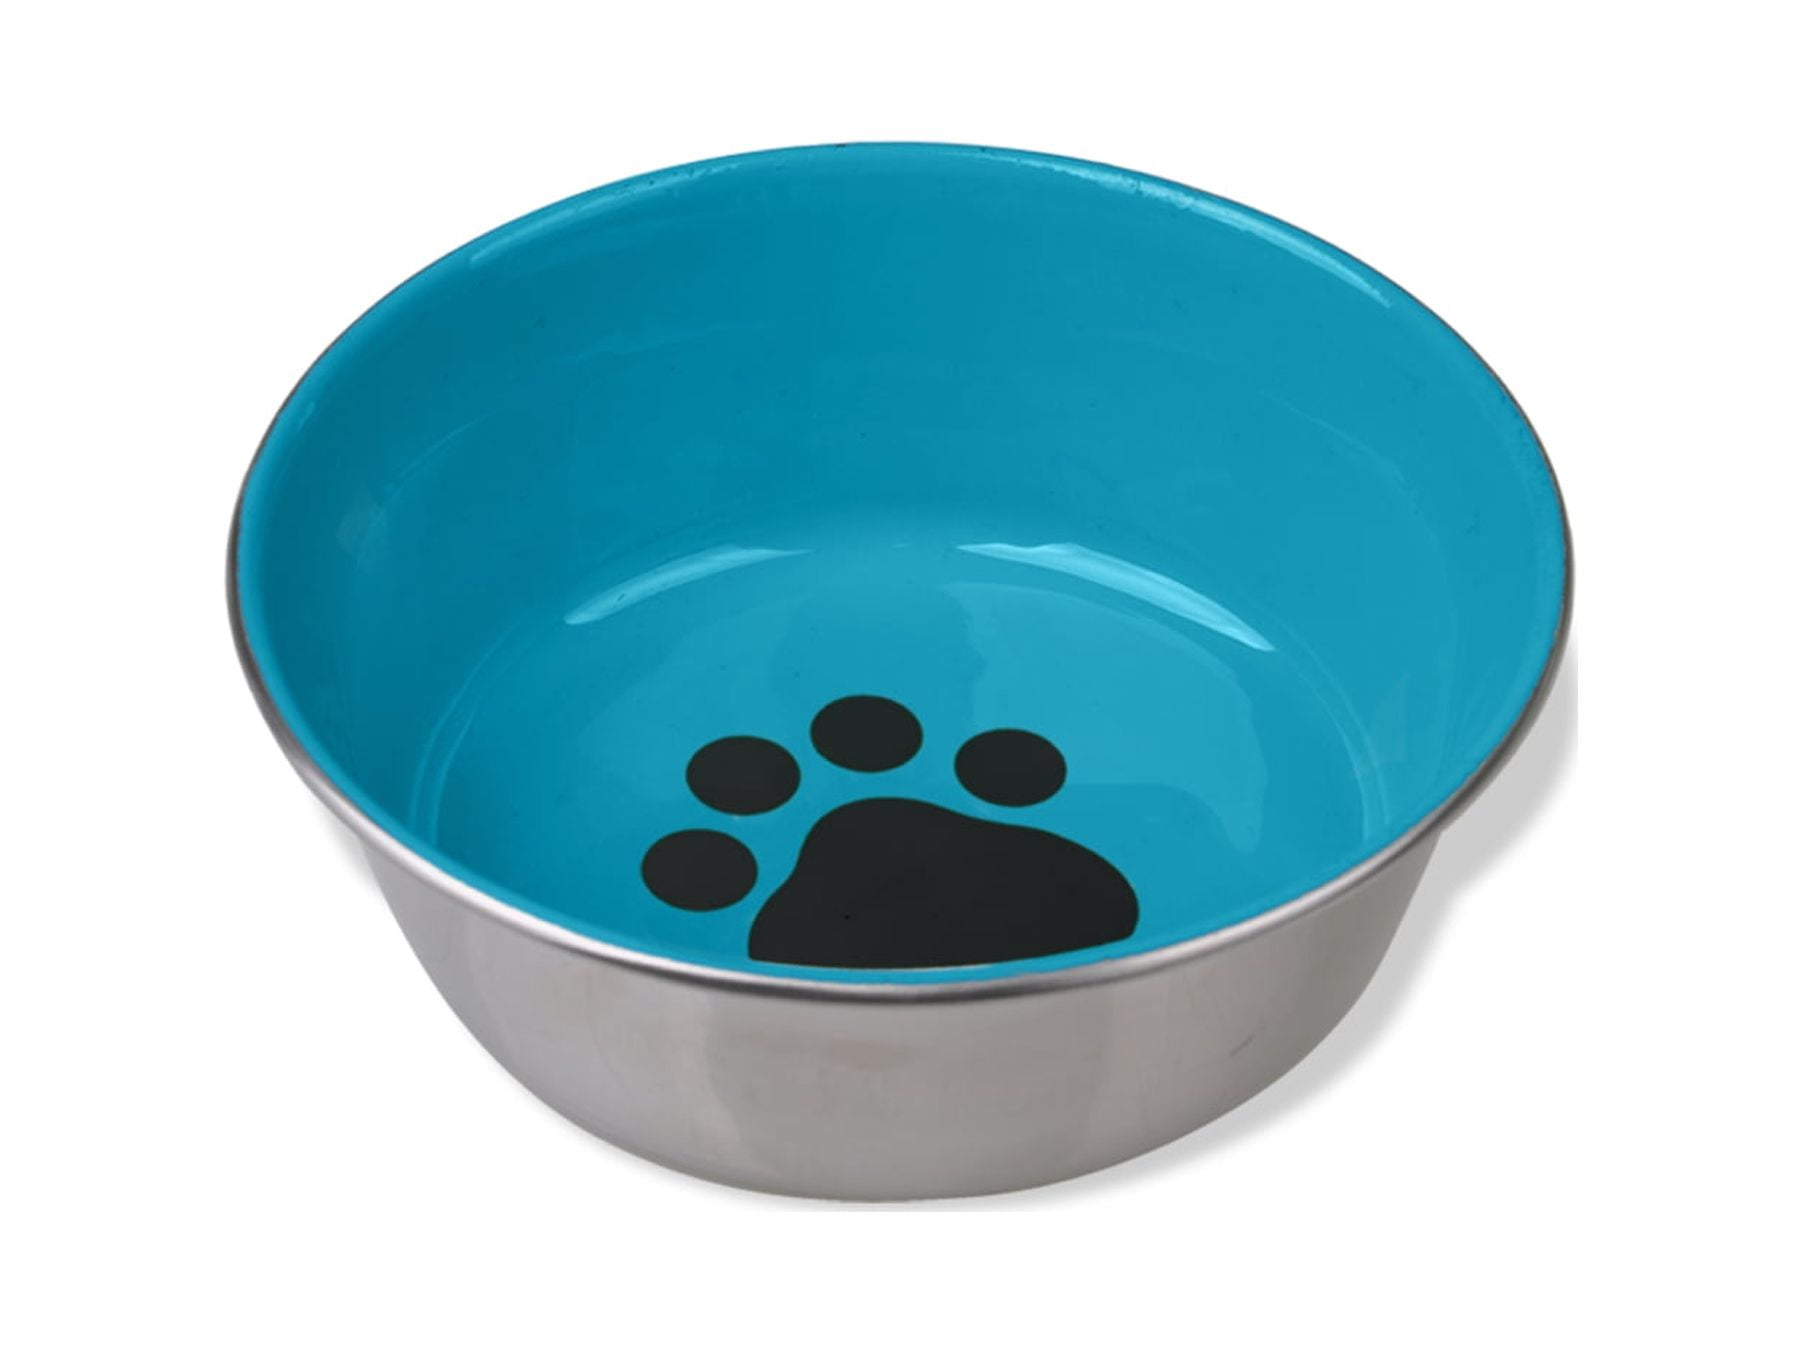 225075 24 Oz Stainless Steel Non-skid Dog Dish With Decorated Enamel Interior - Assorted